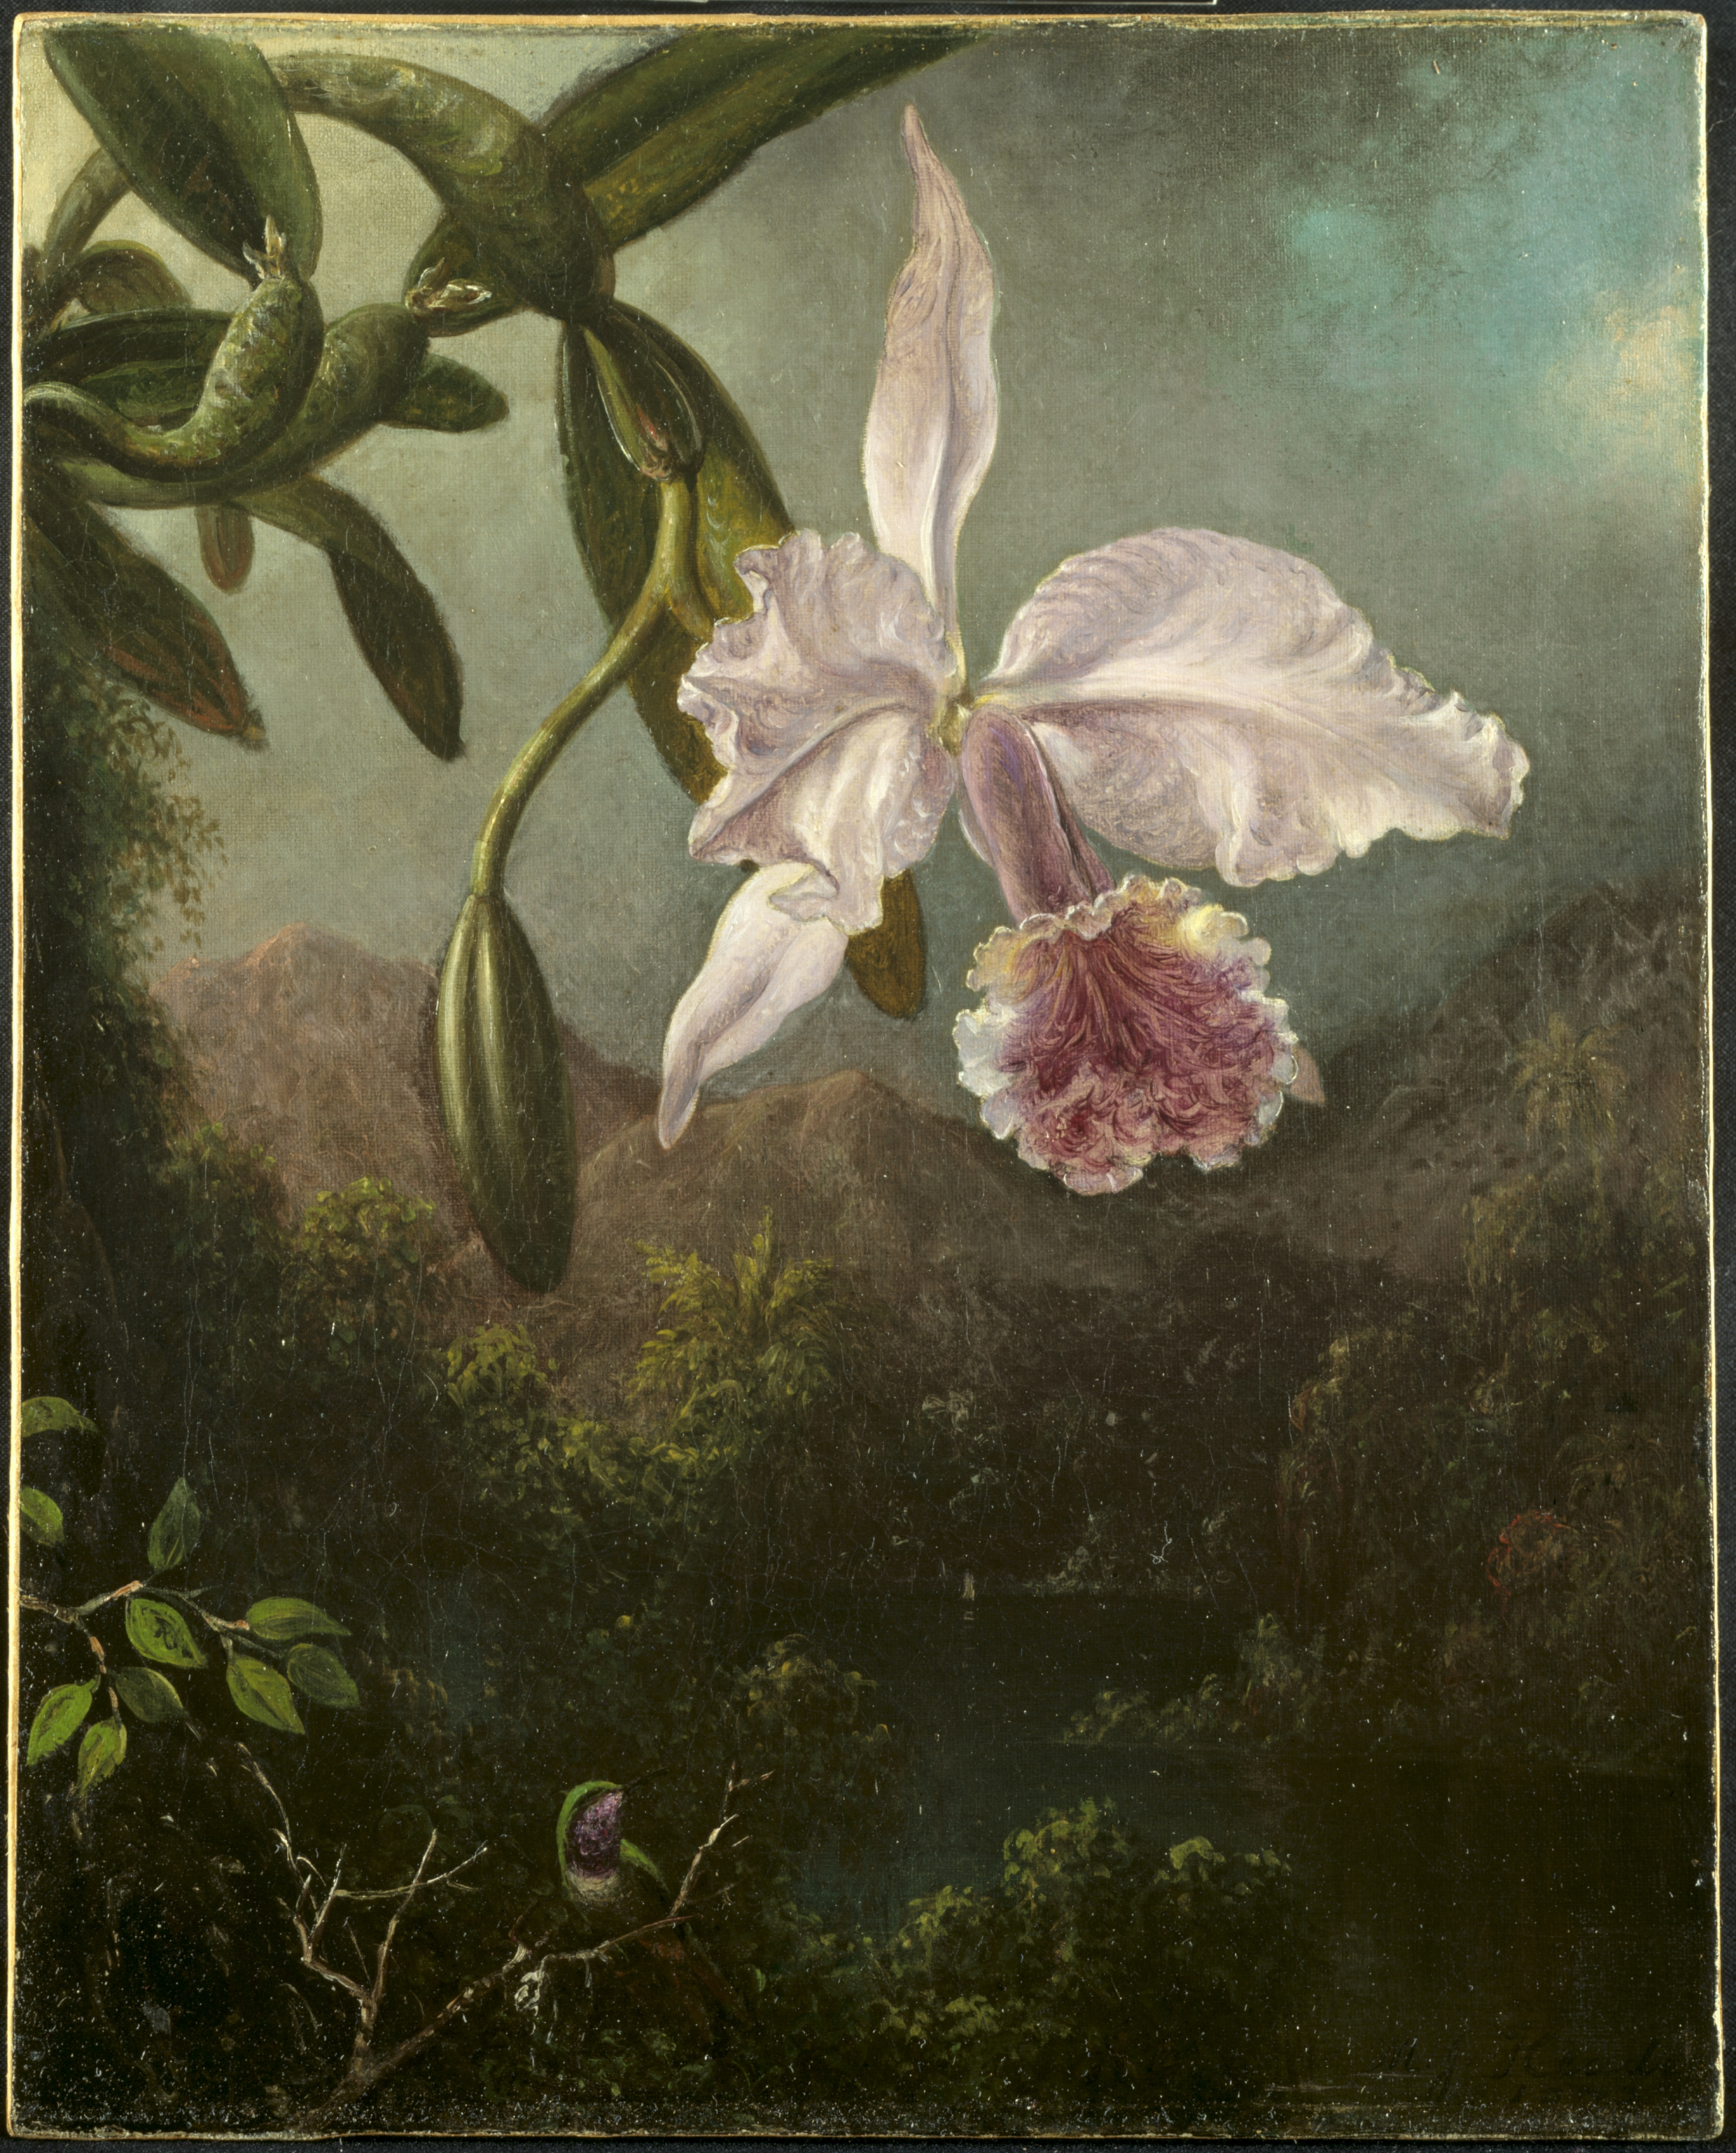 Orchid Blossoms by Martin Johnson Heade - 1873 - 47.6 x 40 cm Cleveland Museum of Art